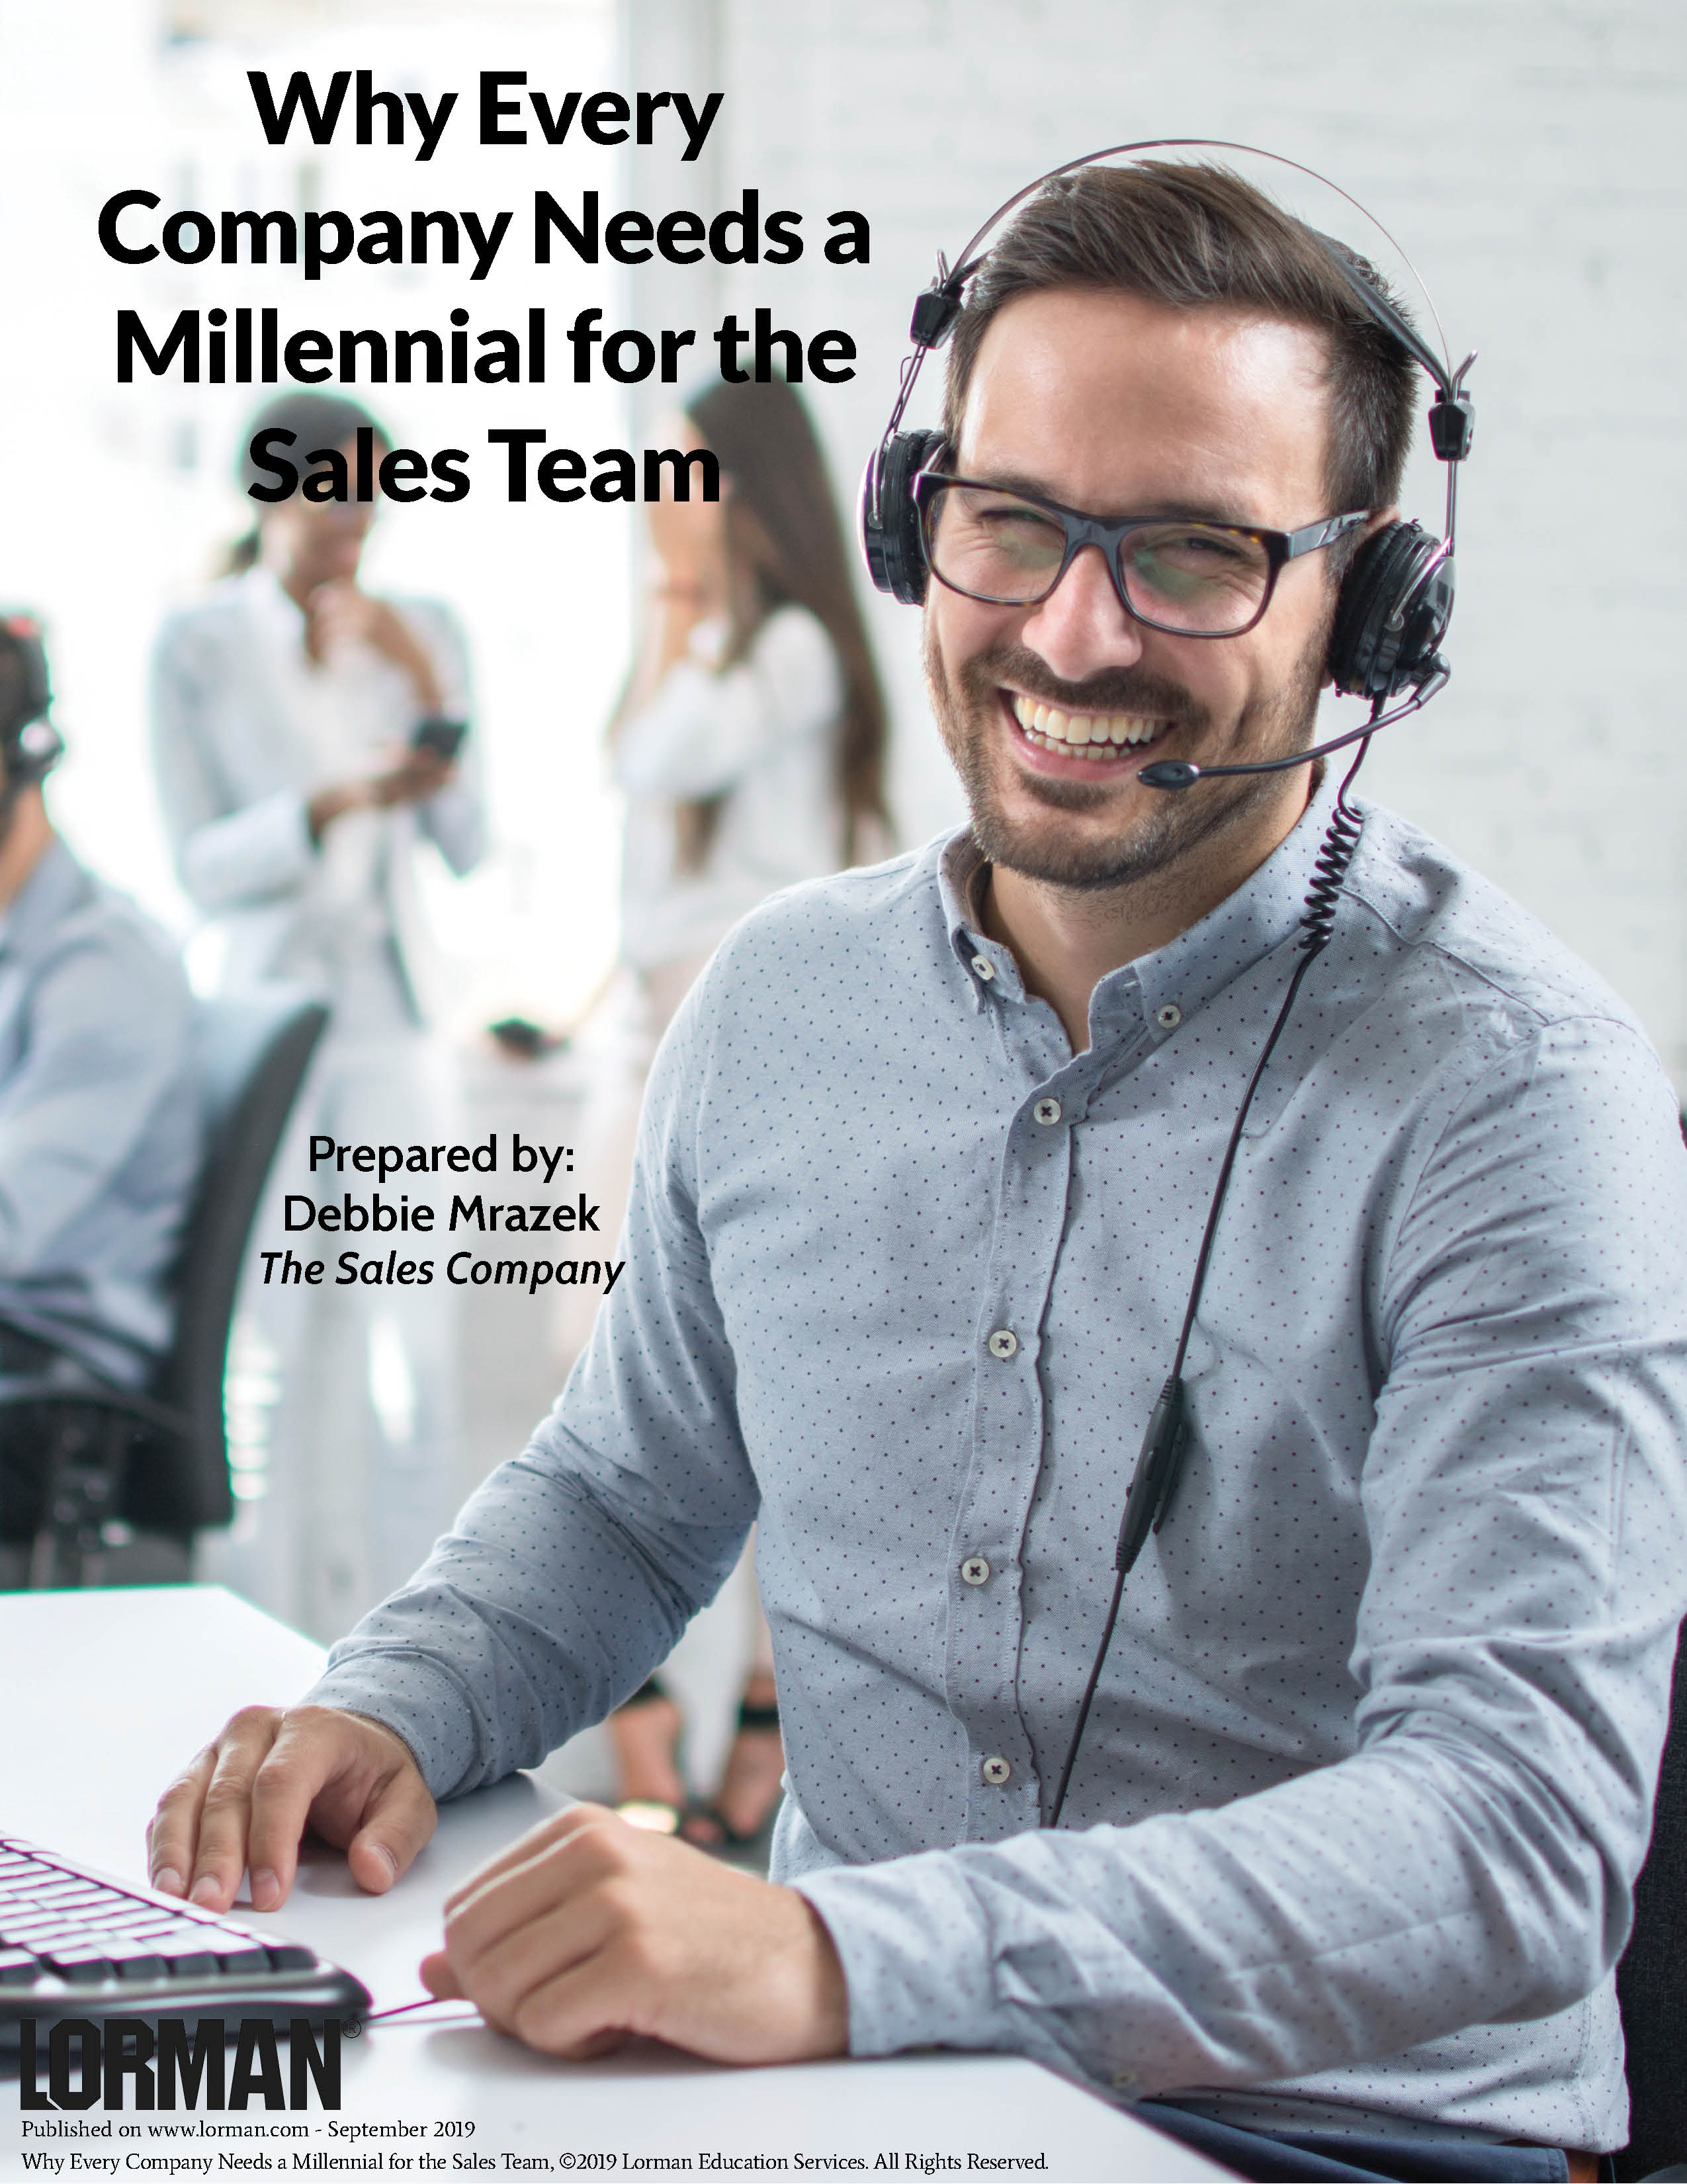 Why Every Company Needs a Millennial for the Sales Team